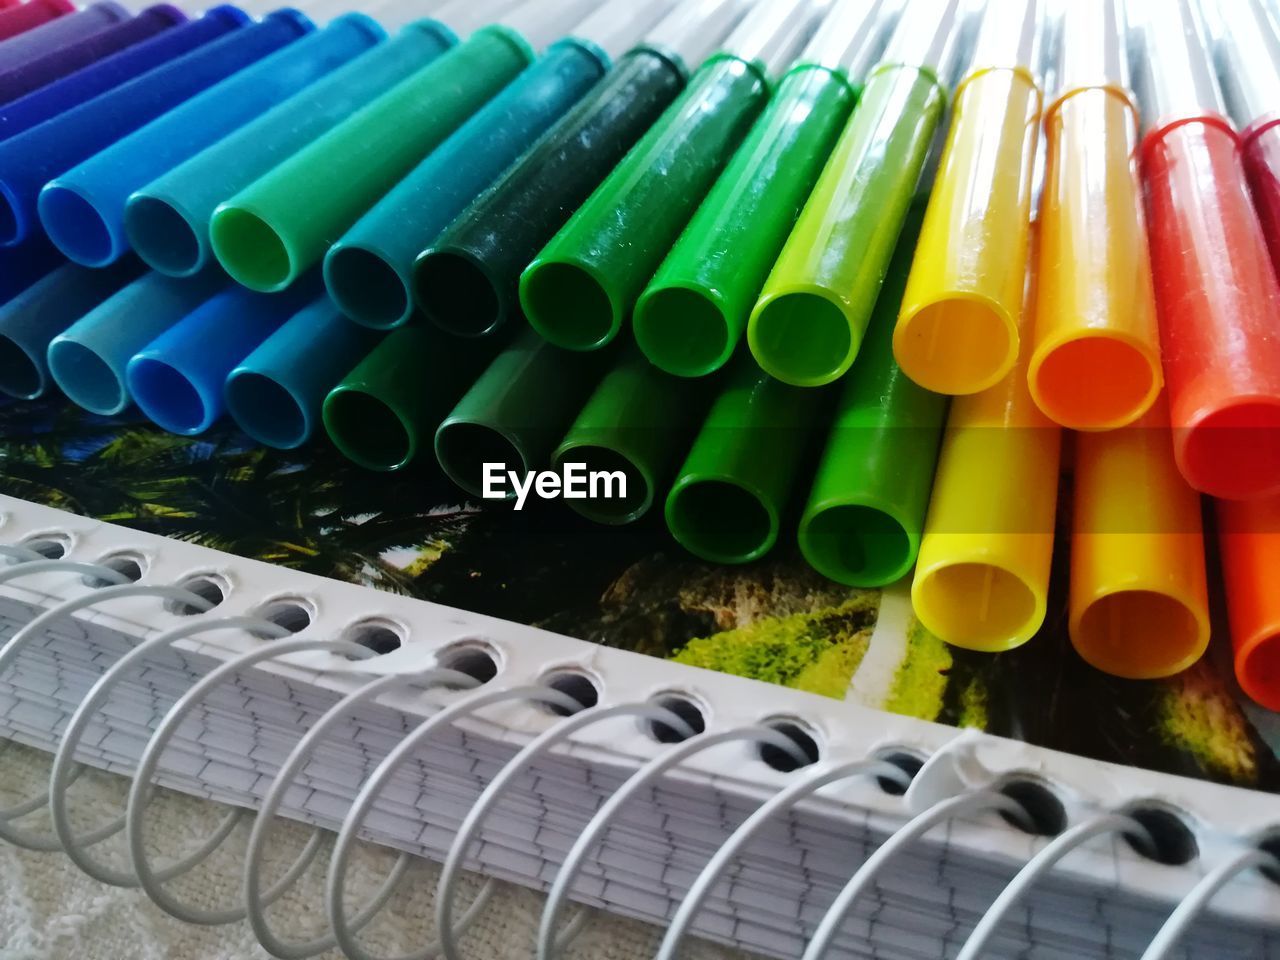 CLOSE-UP OF MULTI COLORED PENCILS IN CONTAINER